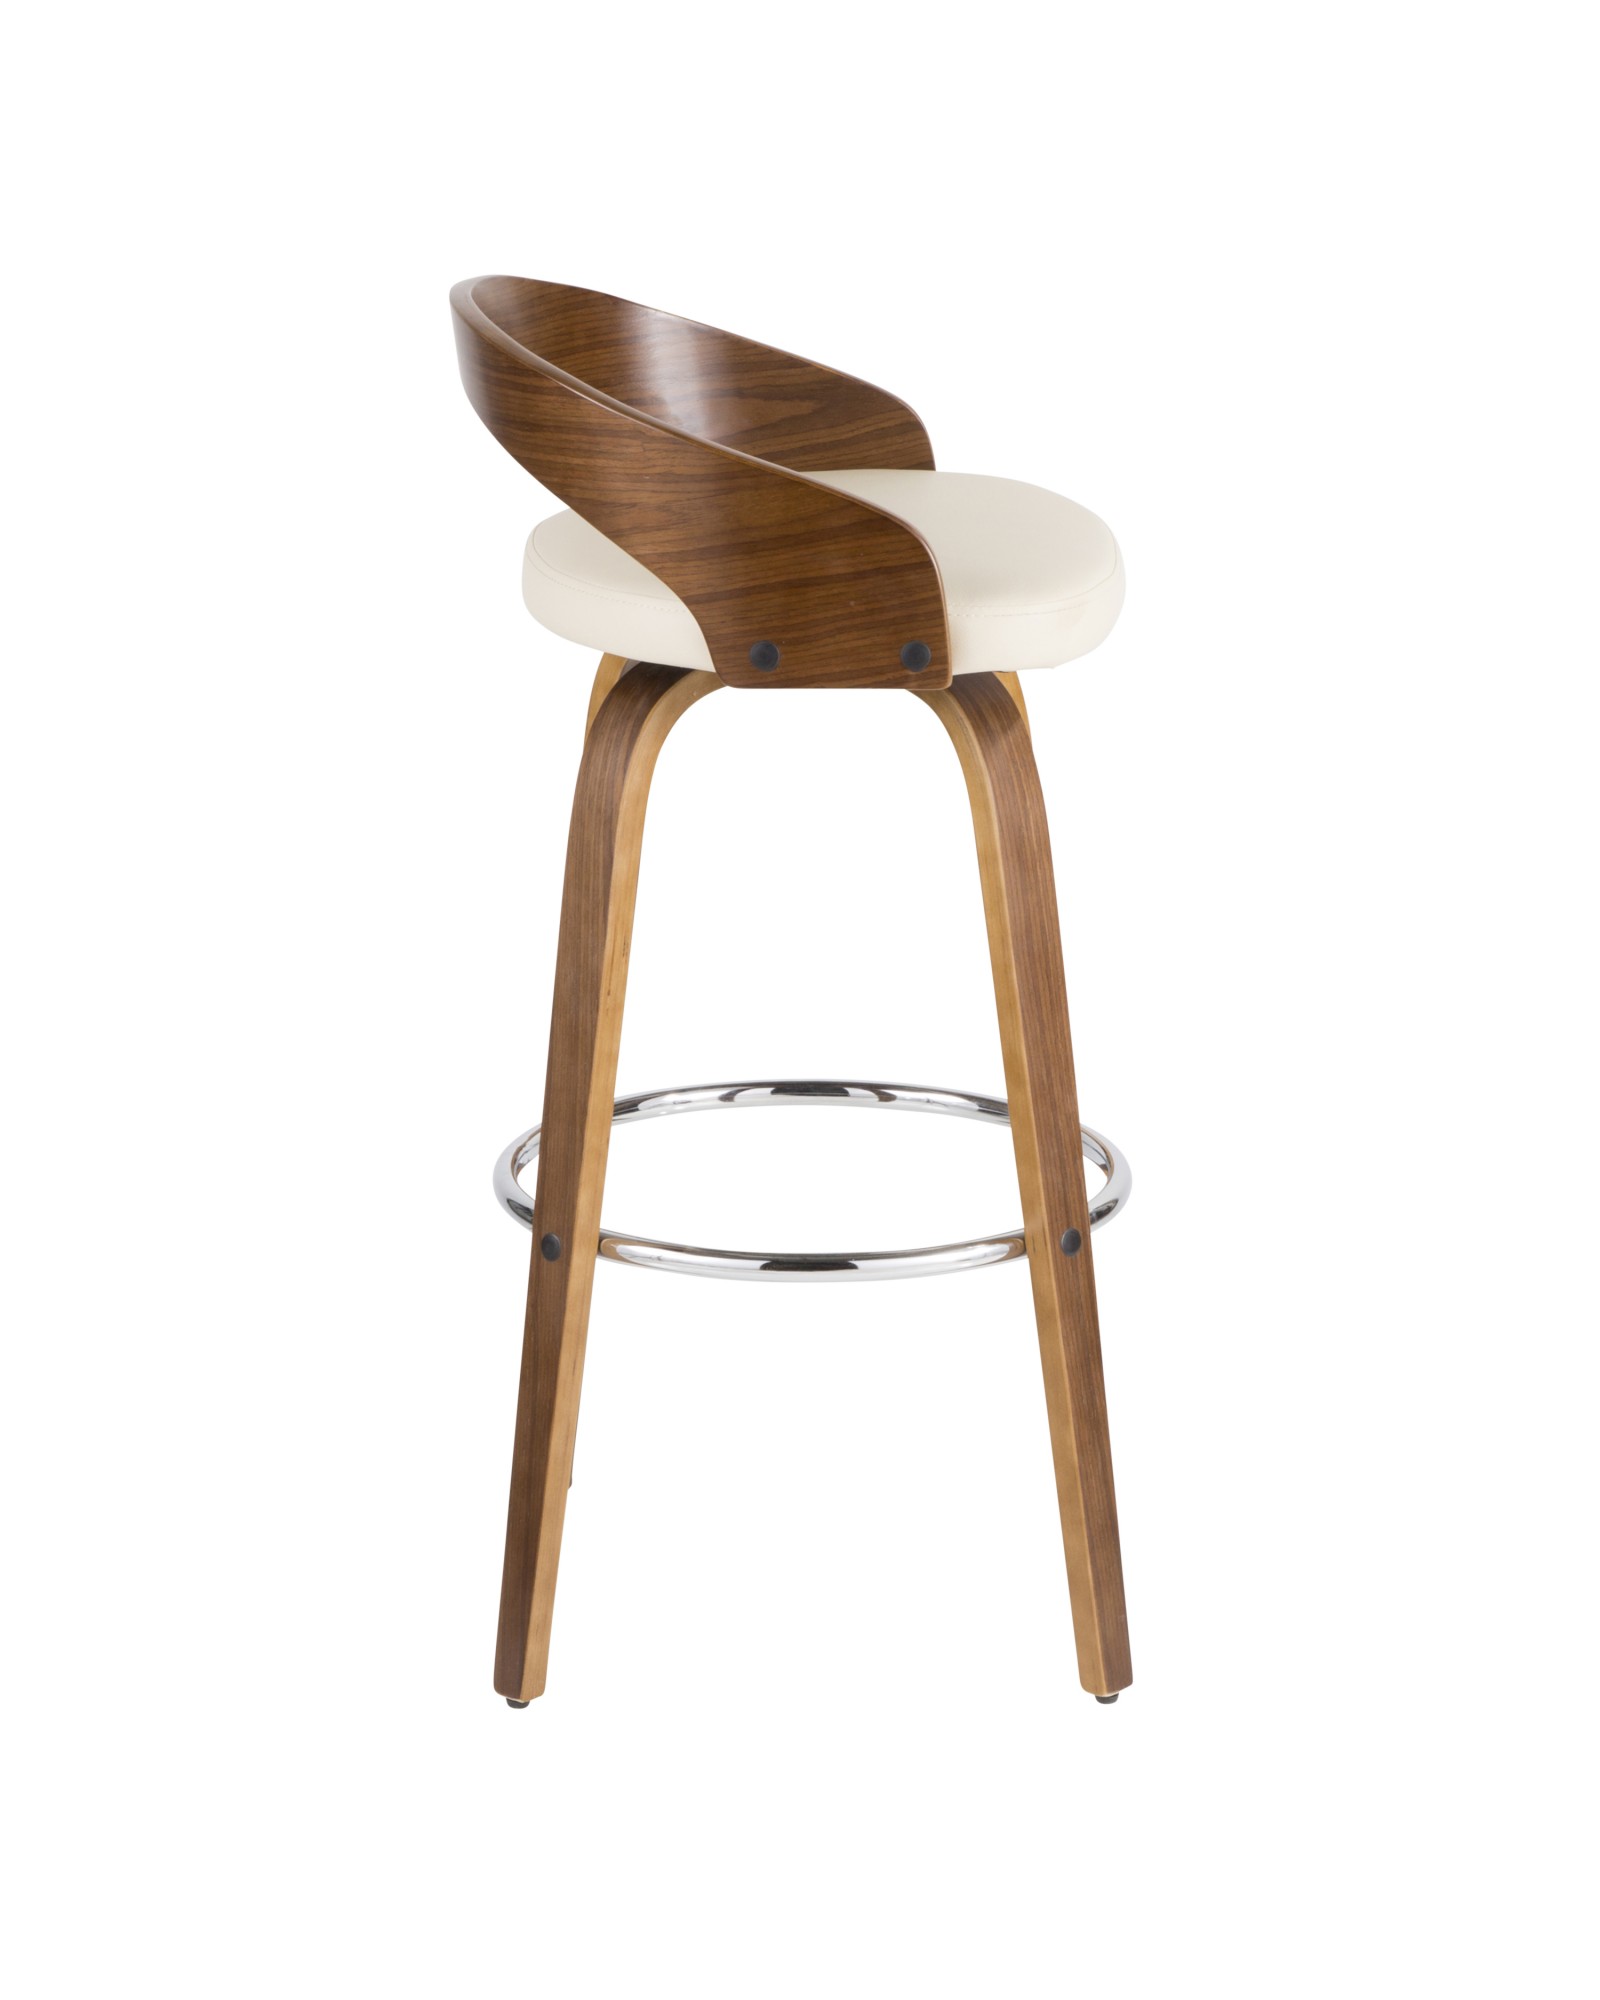 Grotto Mid-Century Modern Barstool in Walnut and Cream Faux Leather